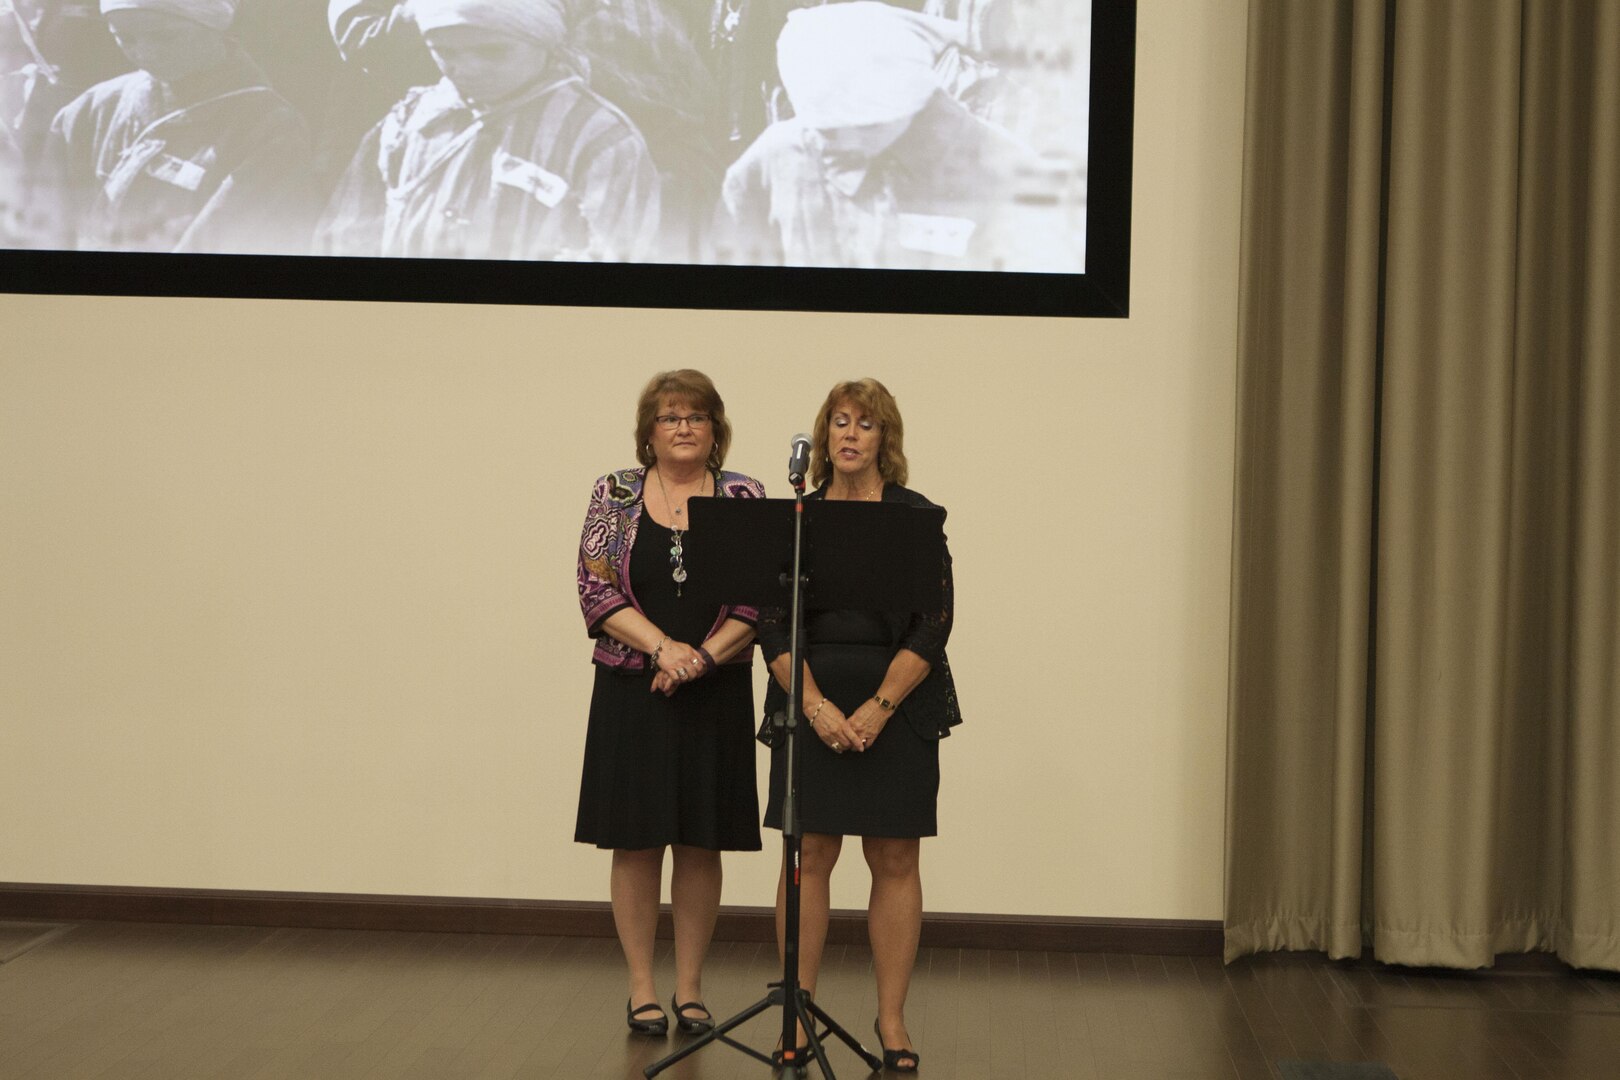 Rose Snavely-Howe, supervisor program analyst in DLA Distributions Acquisitions Operations and Sharon Heiner, a former DLA employee performed “When I am Silent” written by Joan Varner, during the Holocaust Remembrance Day event on Apr. 26. 